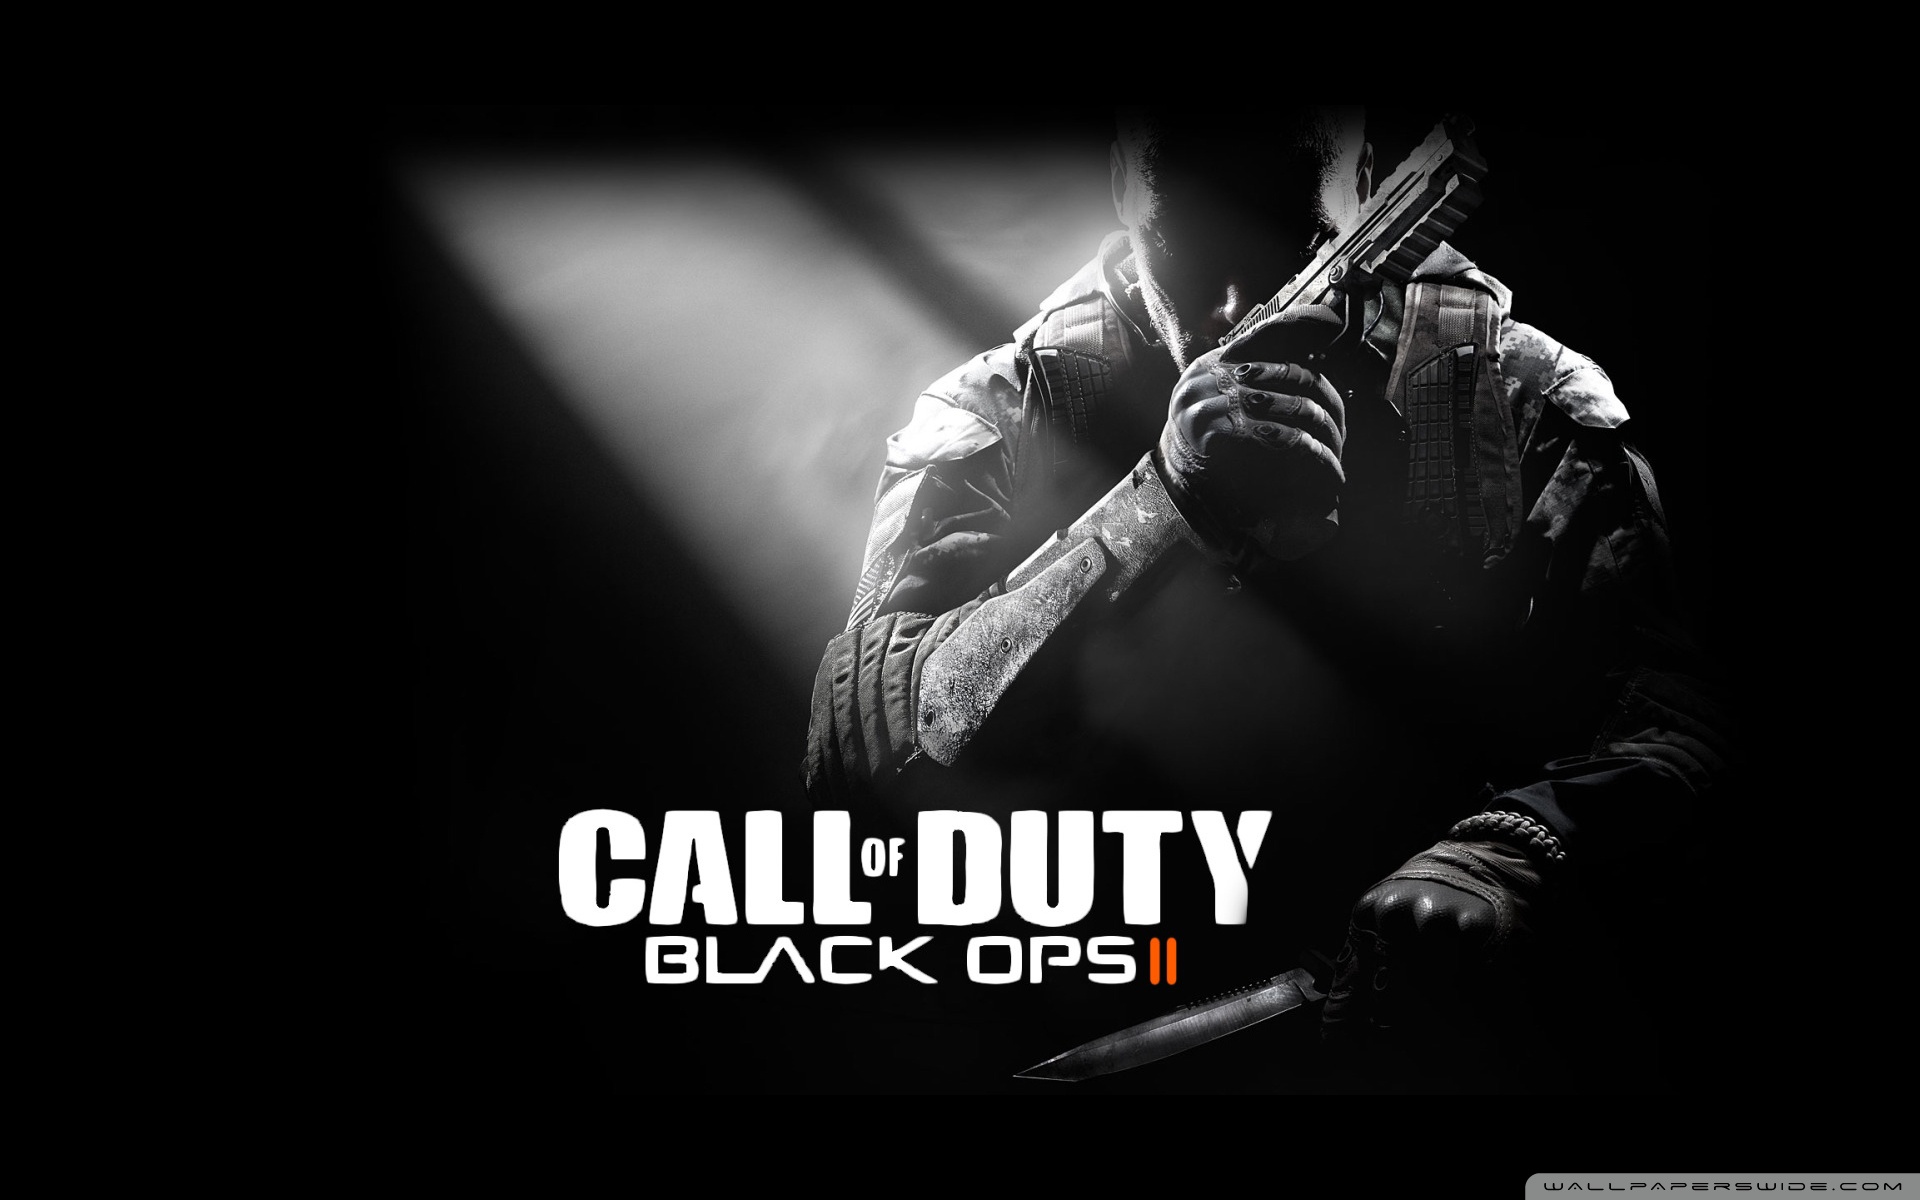 WallpapersWidecom Call Of Duty HD Desktop Wallpapers for 4K